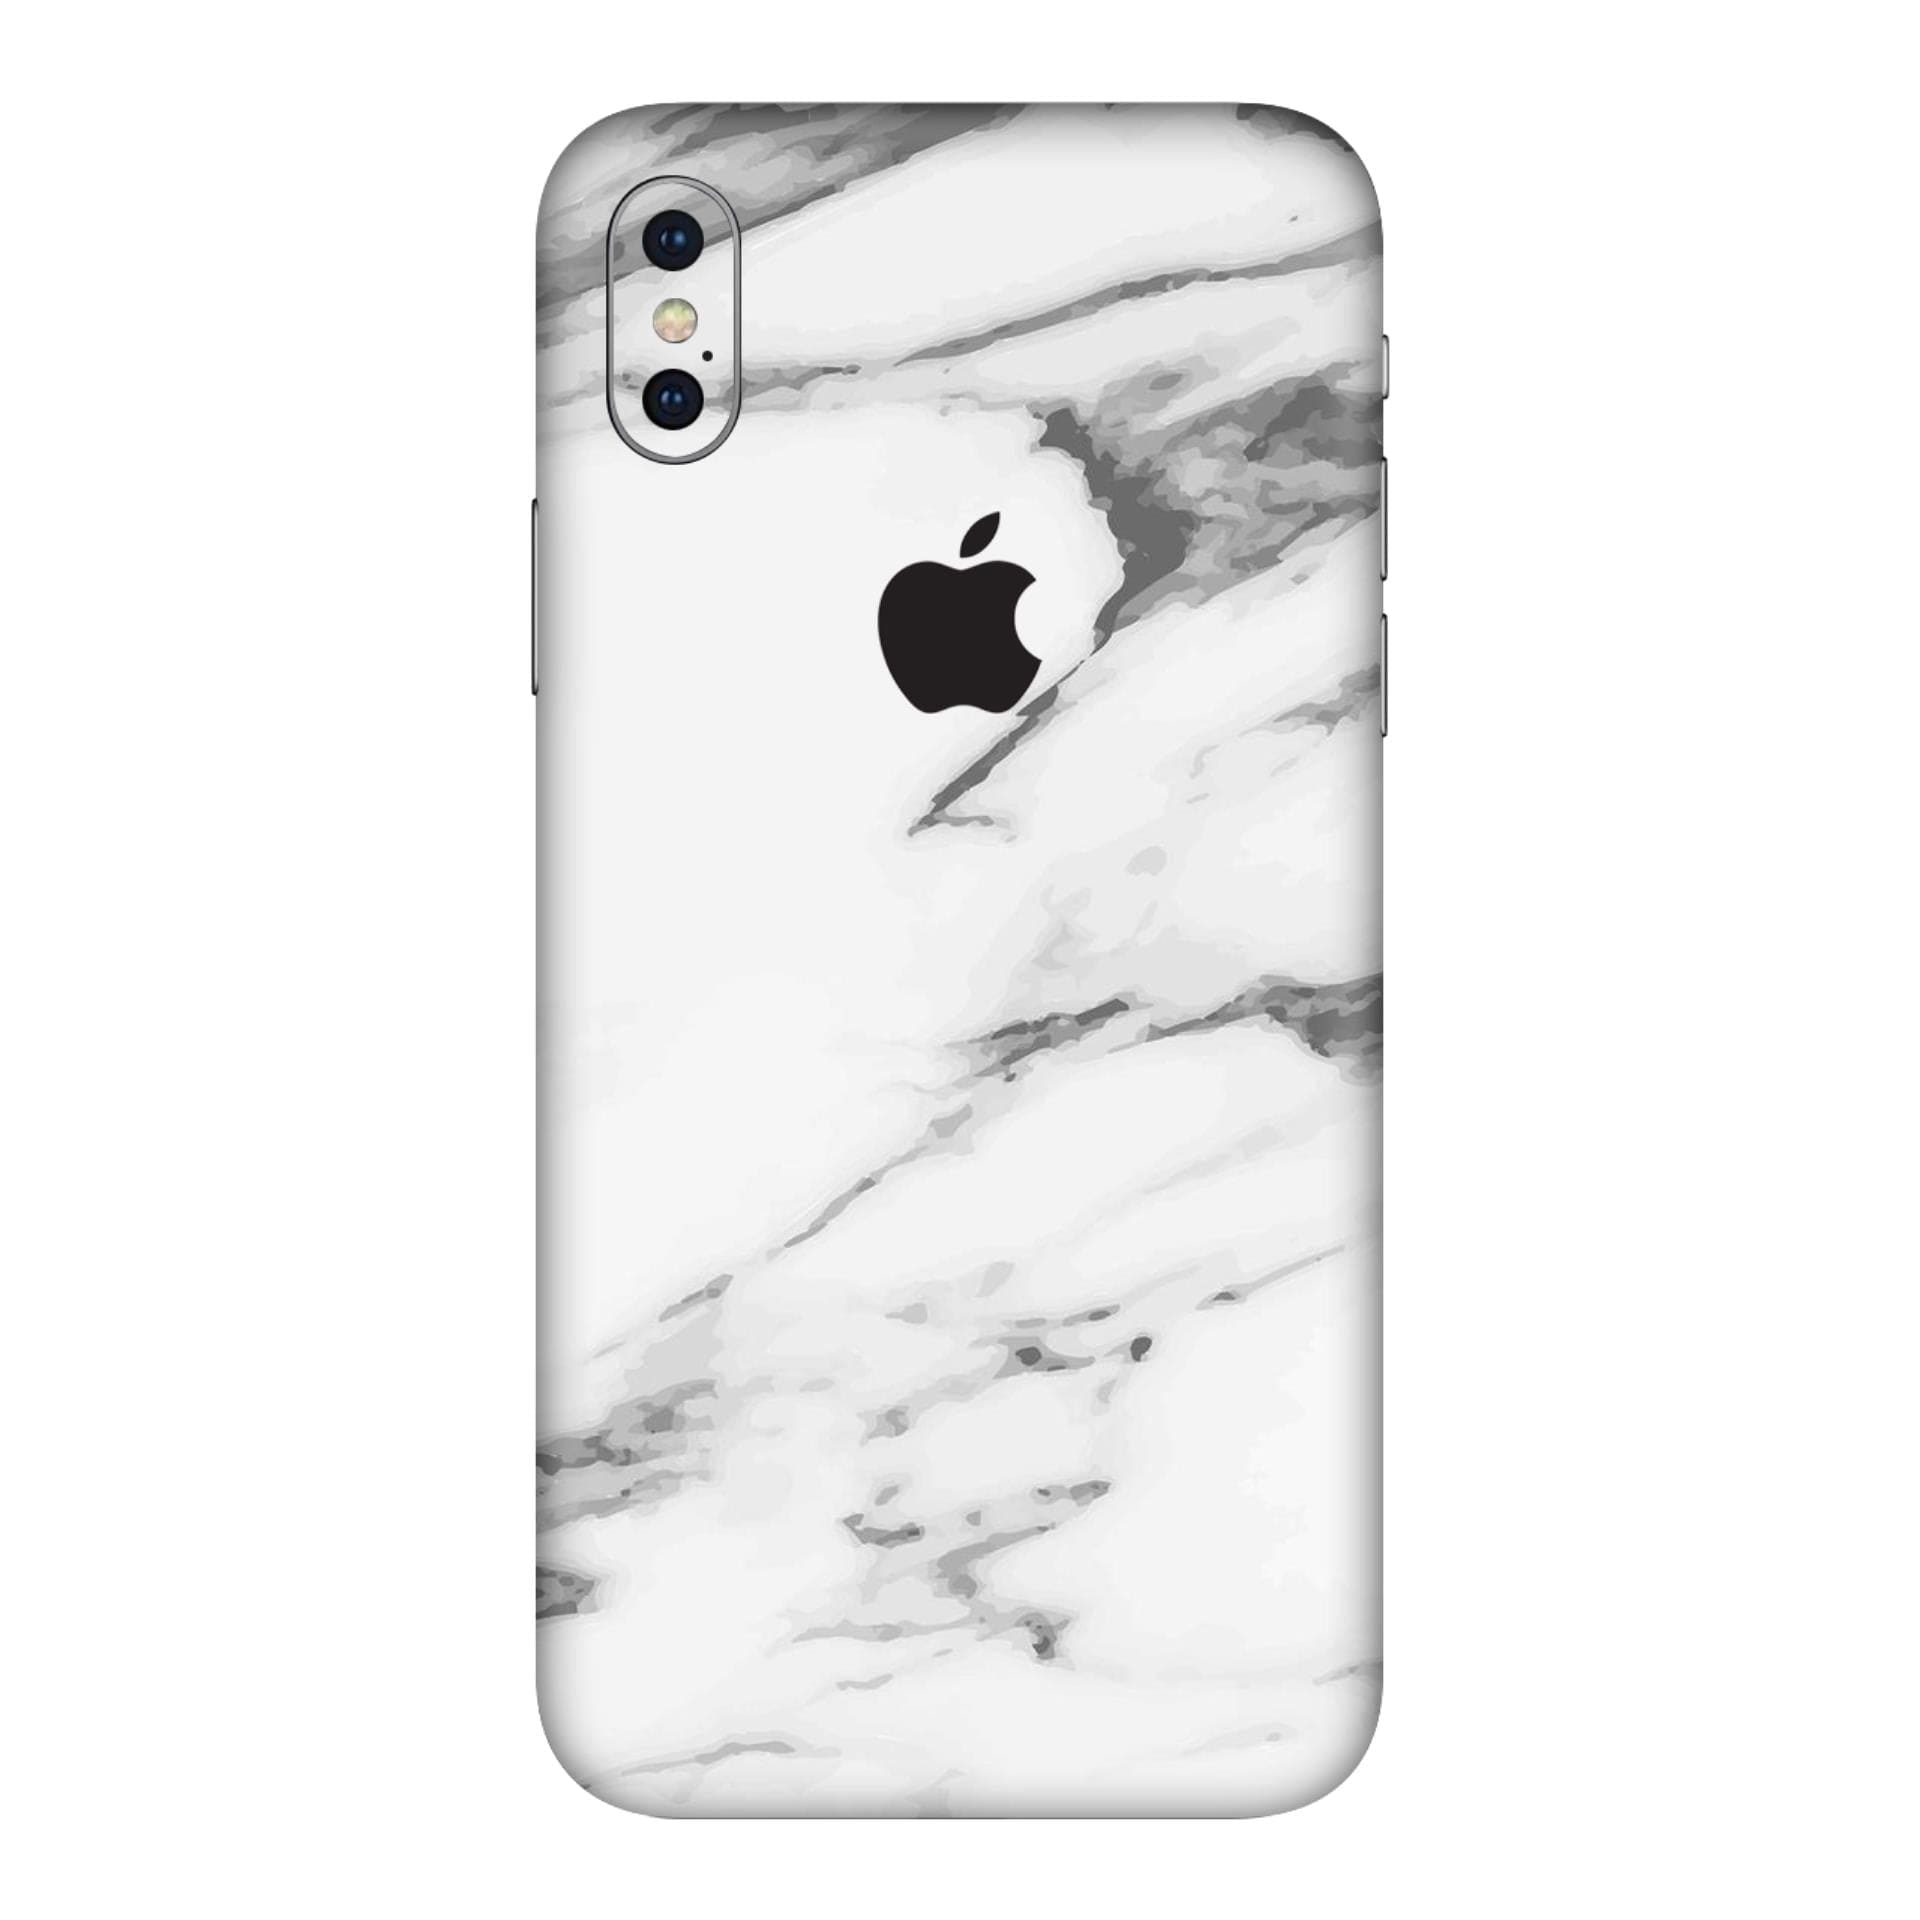 iphone XS Marble White skins